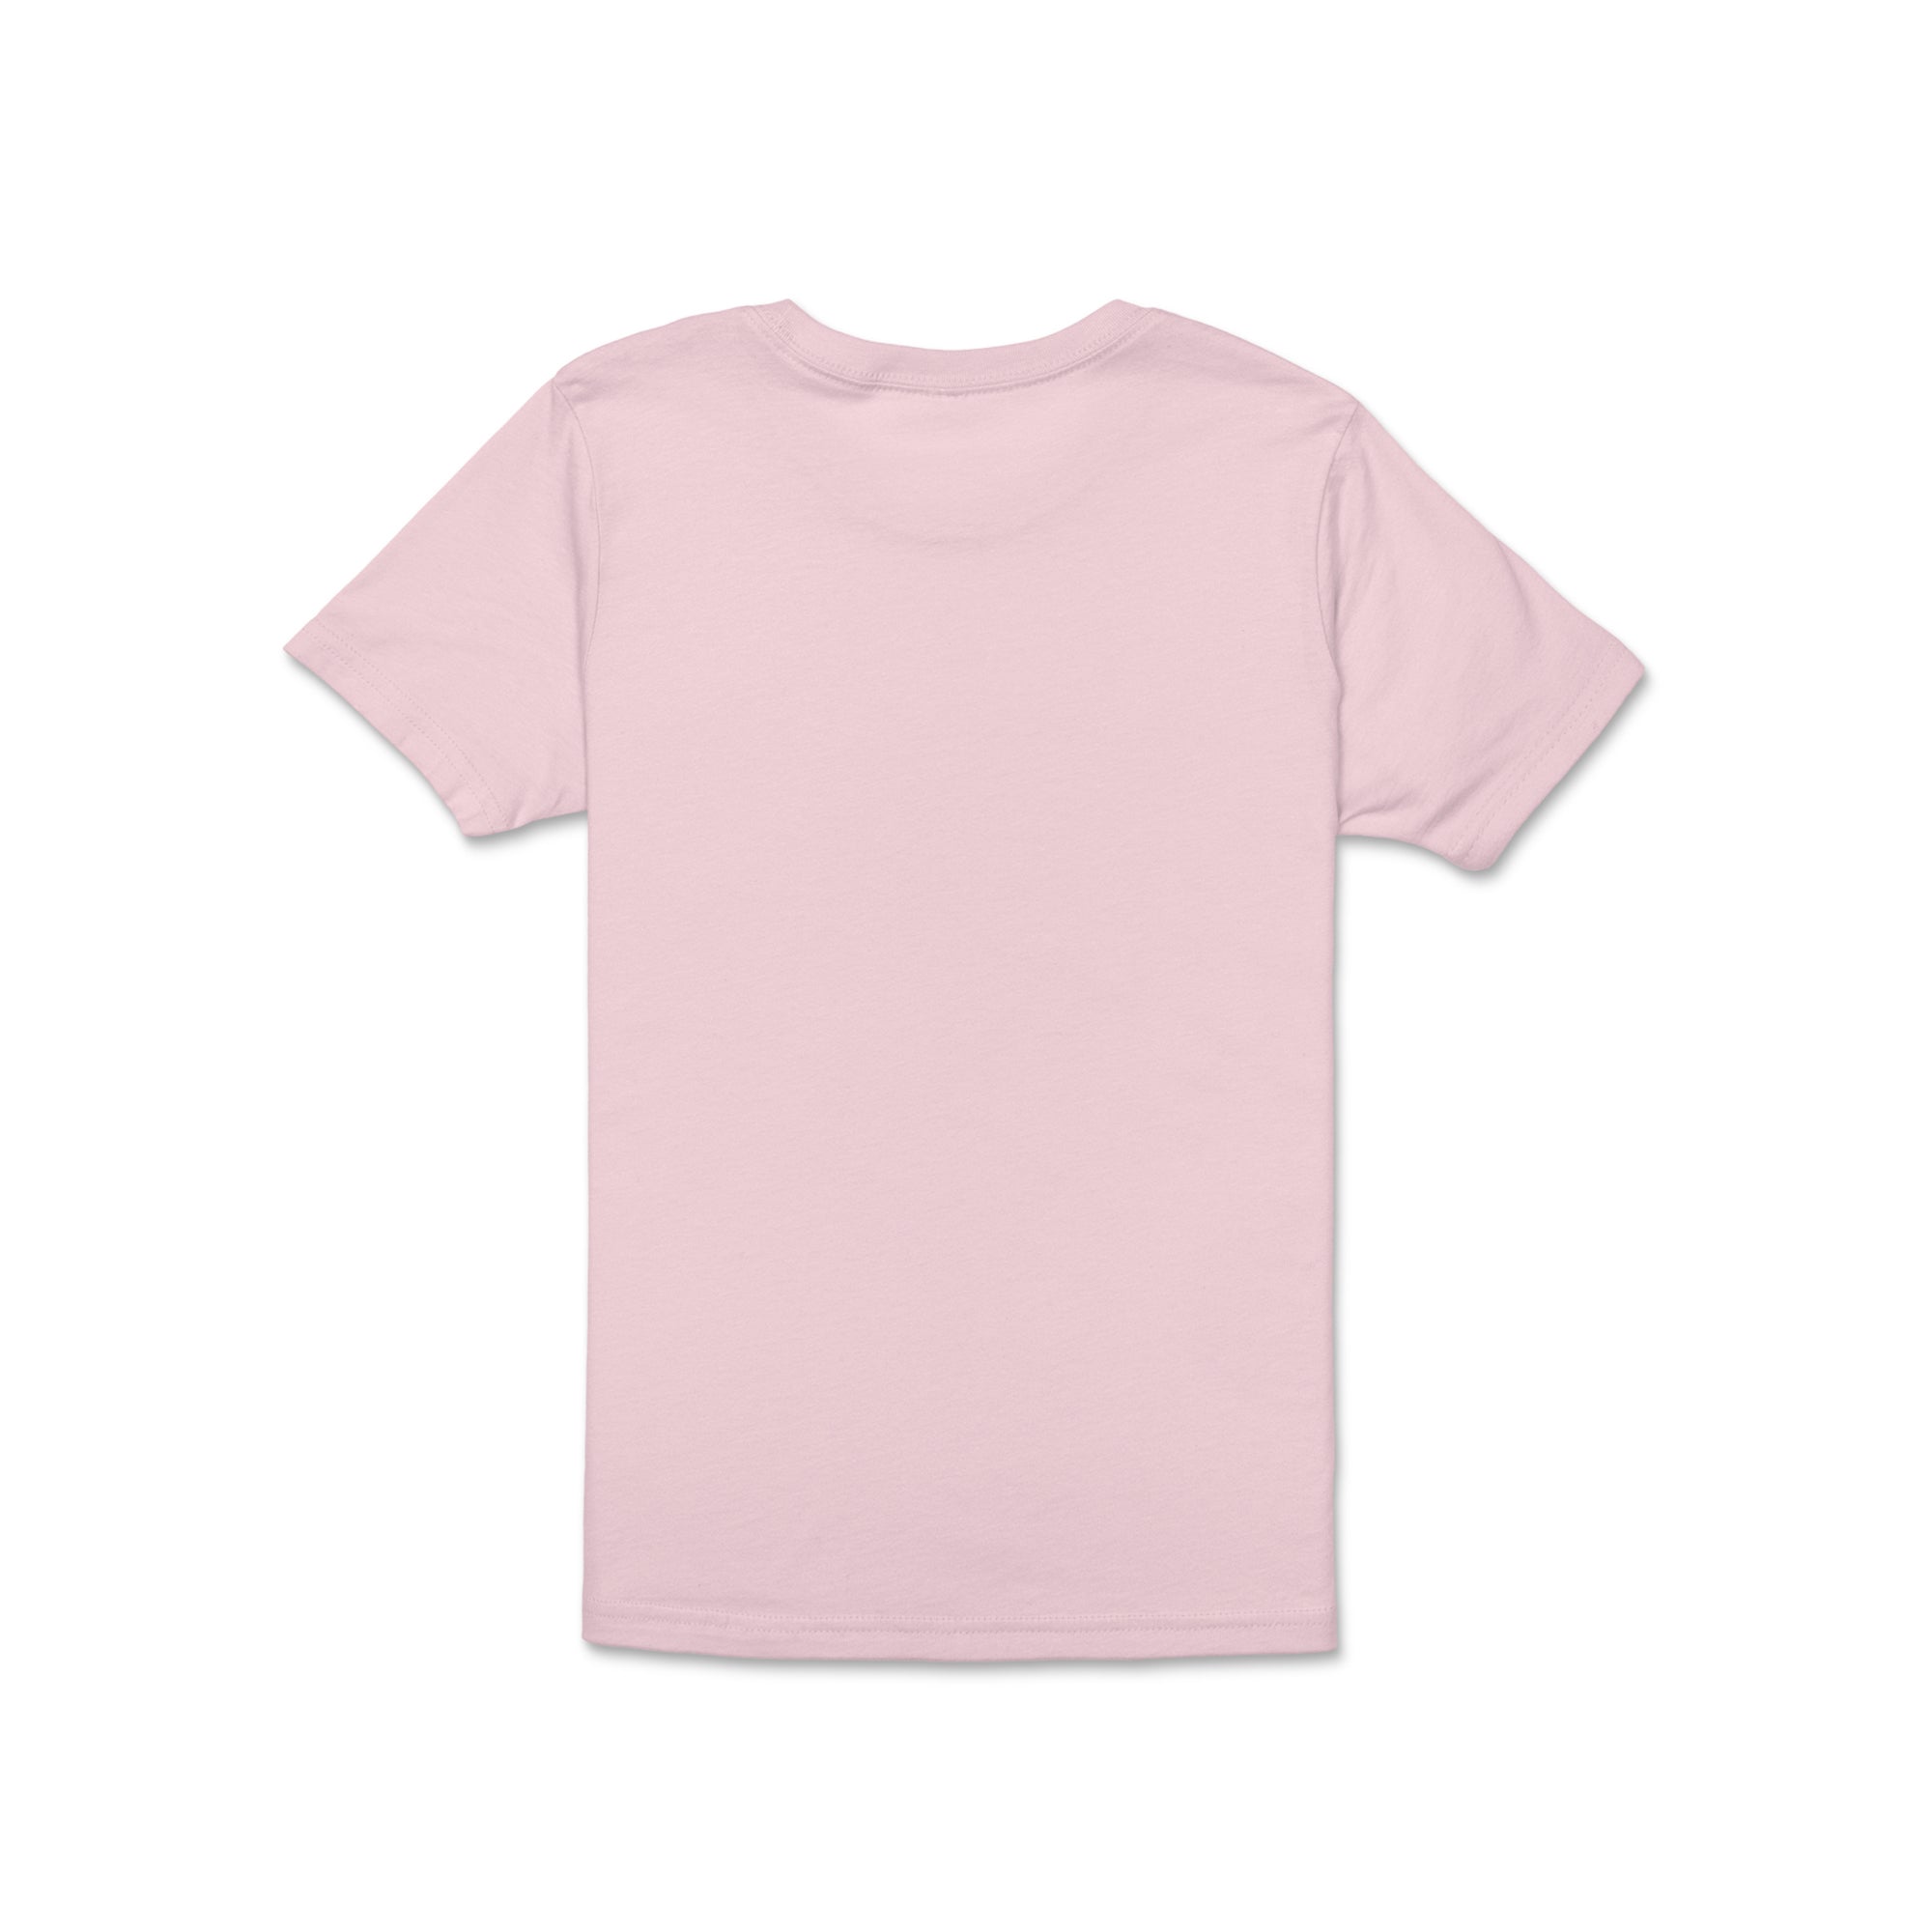 Youth 100% Cotton T